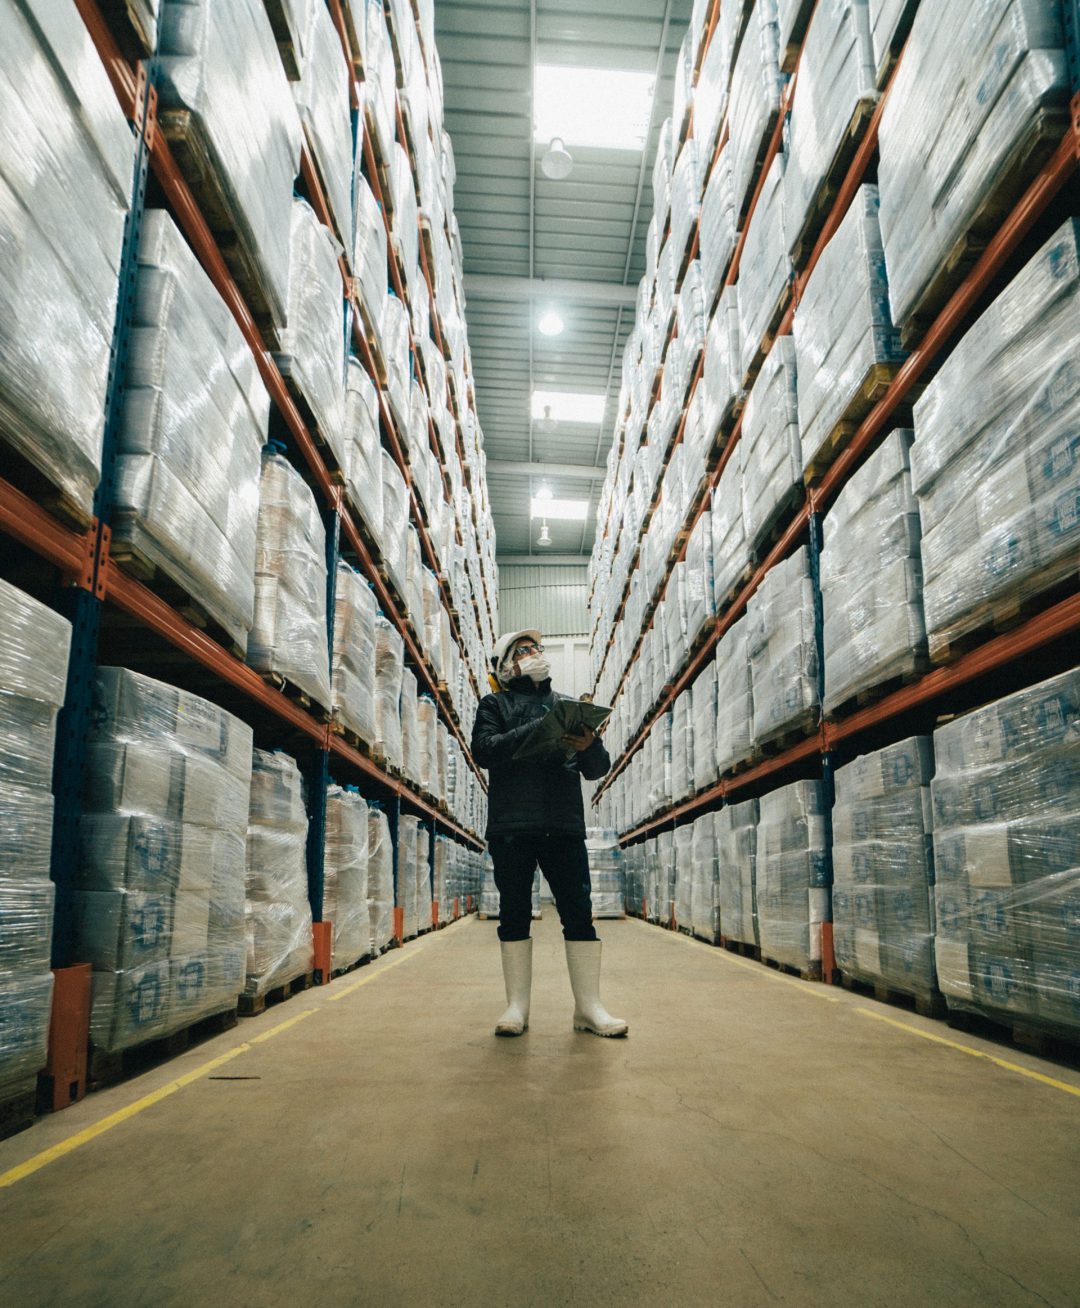 Maersk Kanoo UAE signed an agreement with Jafza to set up its first Warehousing & Distribution facility in the UAE. Image: Unsplash